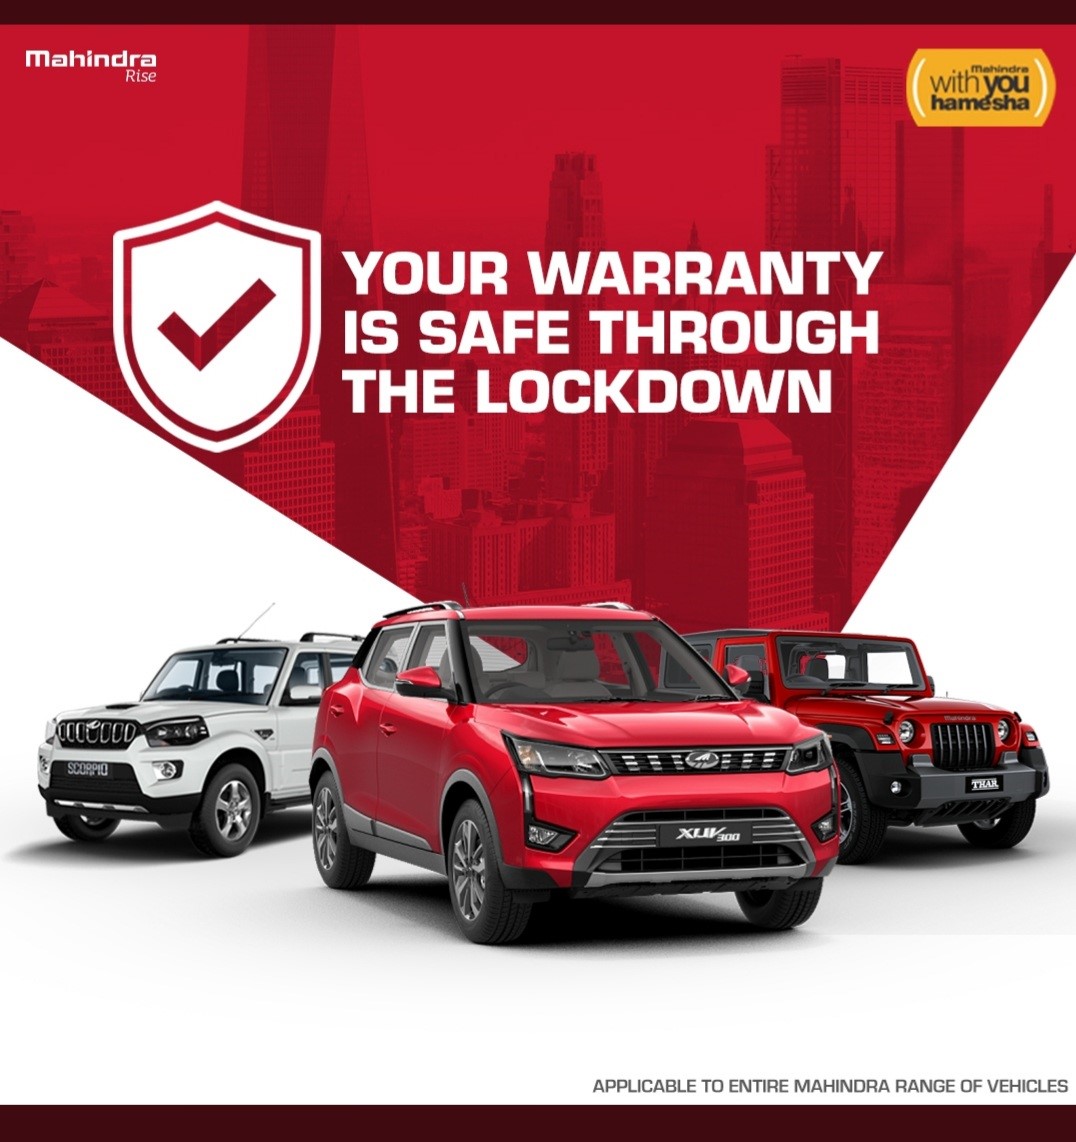 mahindra-extends-warranty-and-free-service-period-on-its-entire-range-of-vehicles-by-3-months